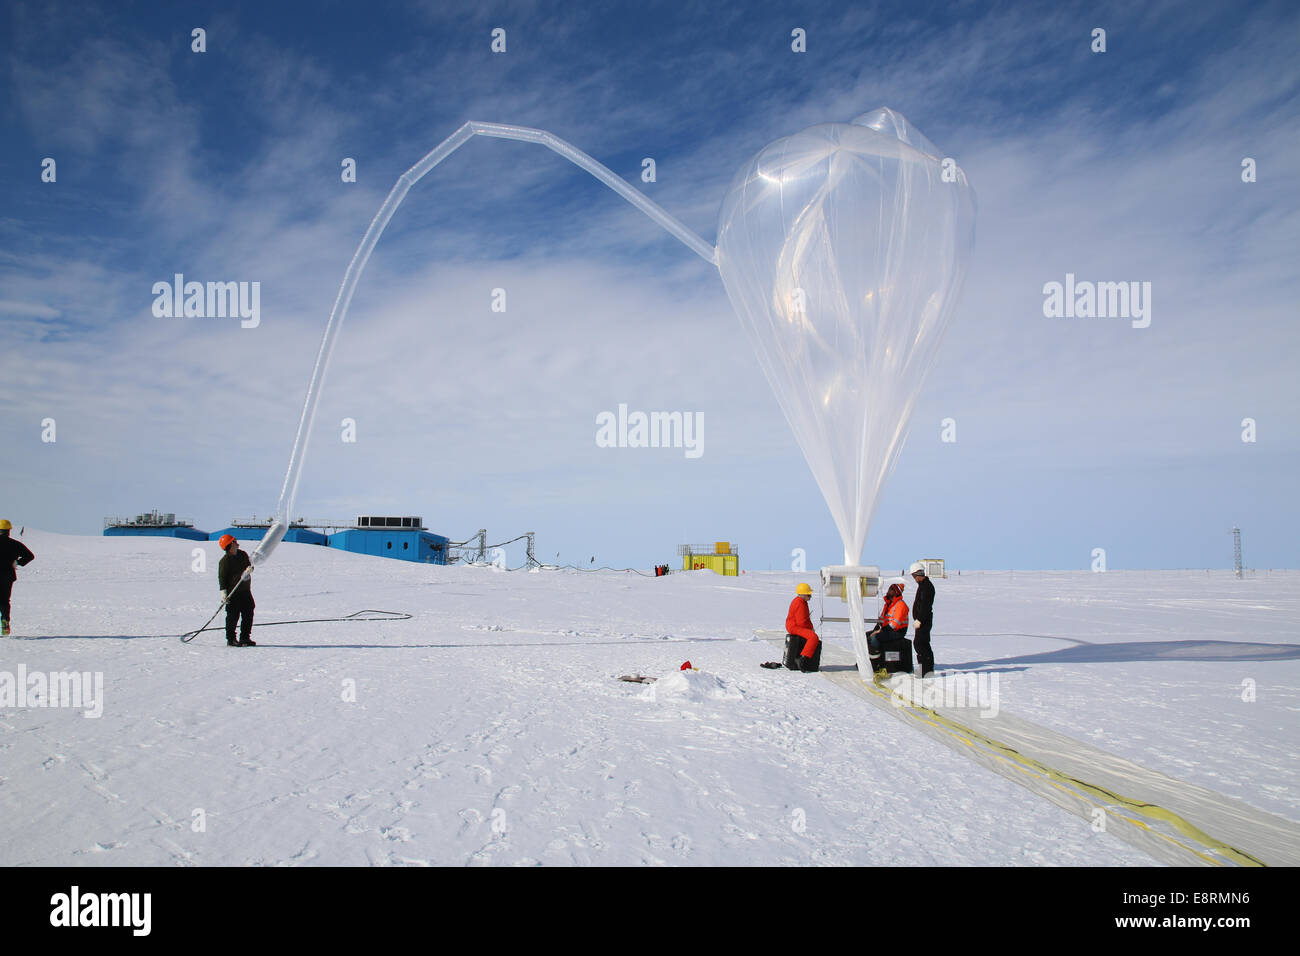 The BARREL team at Halley Research Station in Antarctica, work to inflate a balloon.  The long tube on the left is the inflation Stock Photo